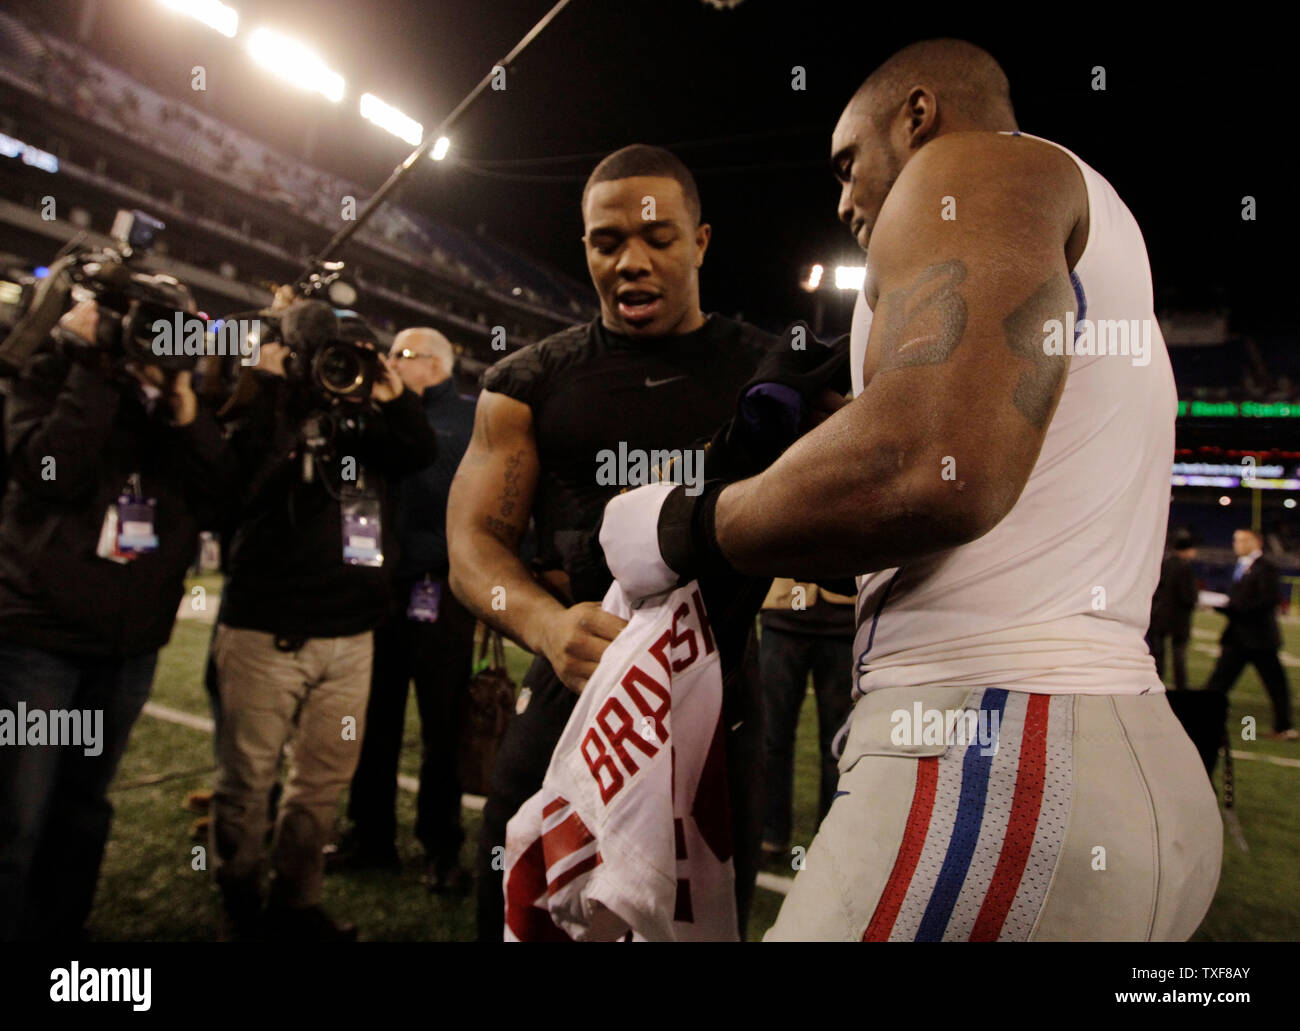 New York Giants Ahmad Bradshaw (Right) trades jerseys with Baltimore Ravens  Ray Rice (L) after the